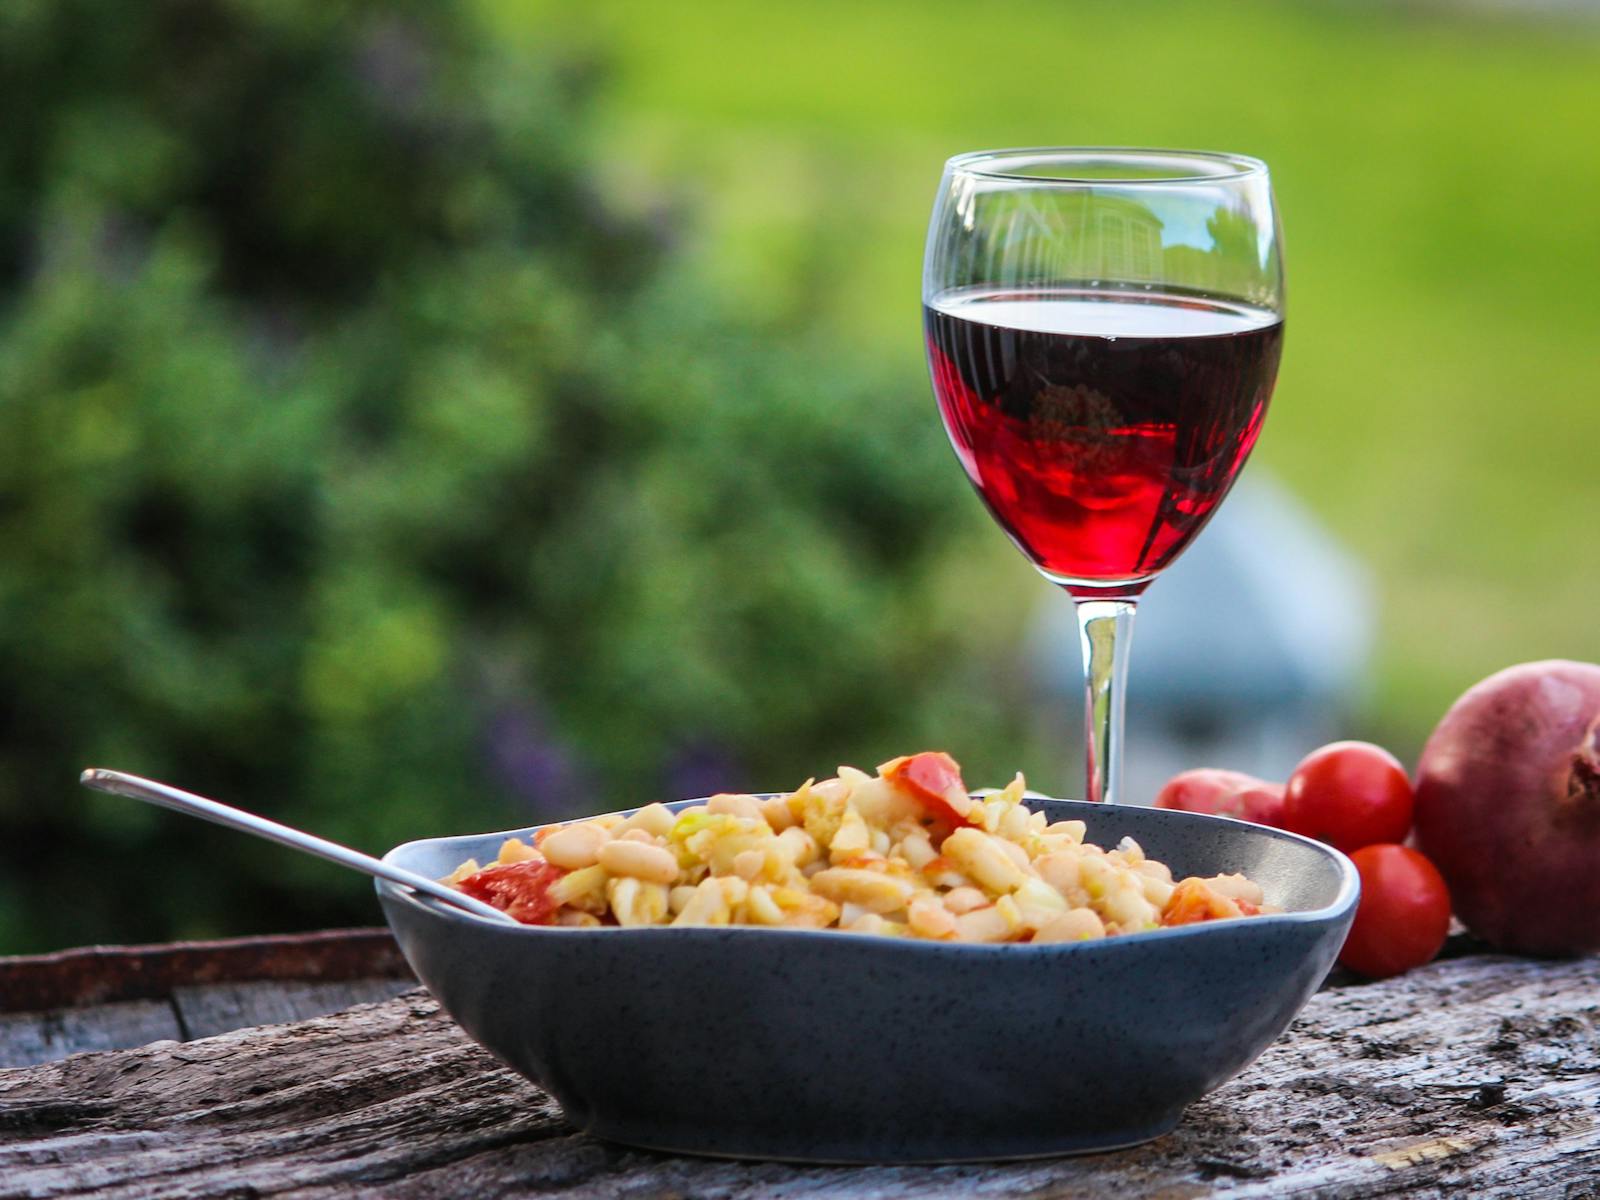 Pasta e fagioli with a glass of Tassie red